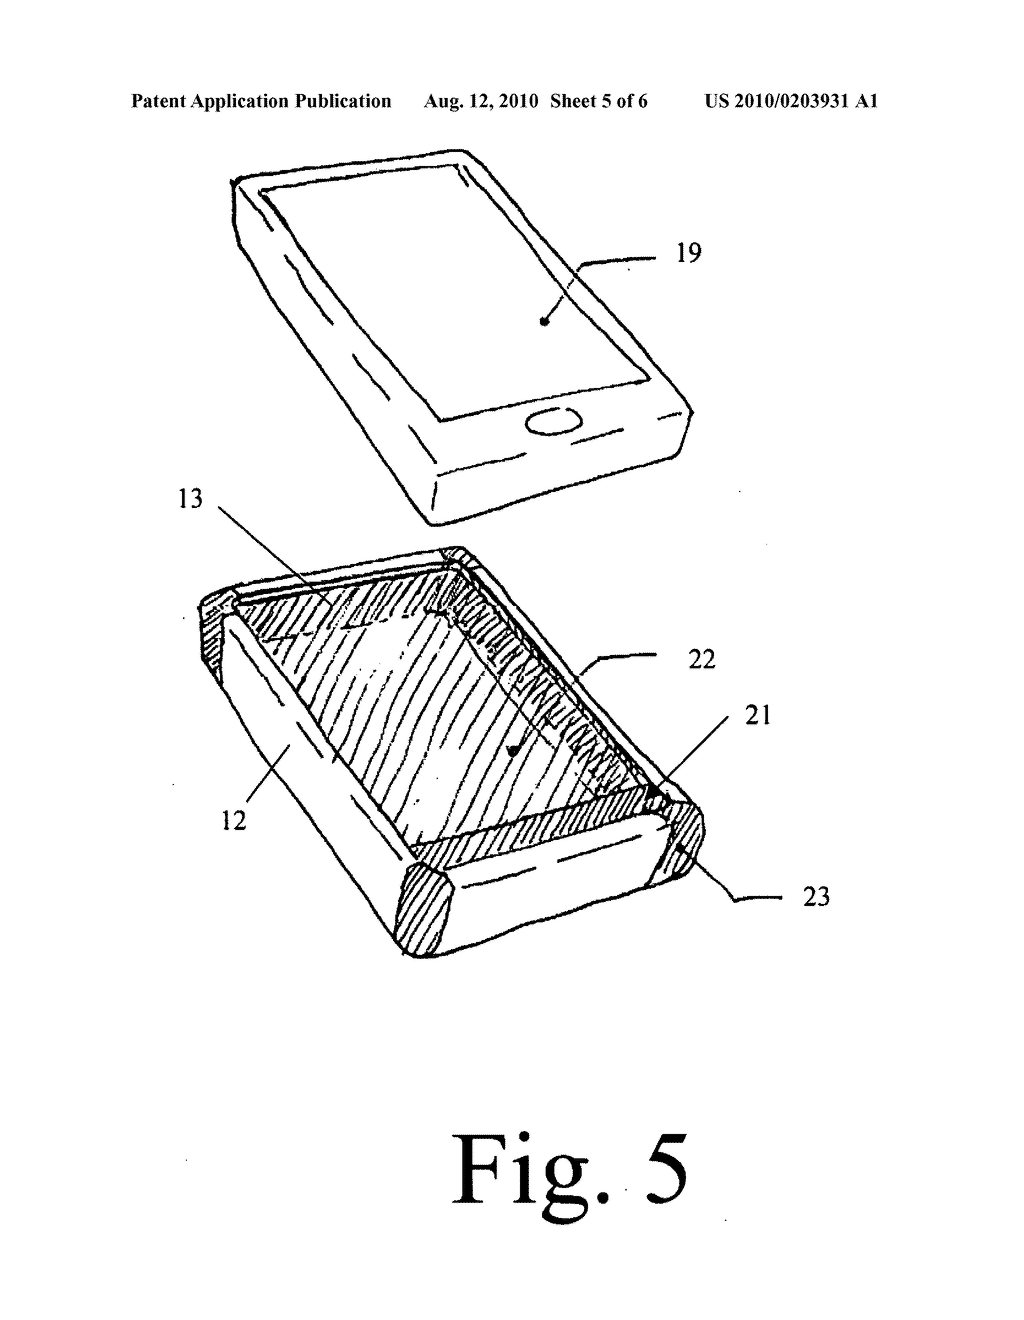 One Piece Co-formed Exterior Hard Shell Case with an Elastomeric Liner for Mobile Electronic Devices - diagram, schematic, and image 06